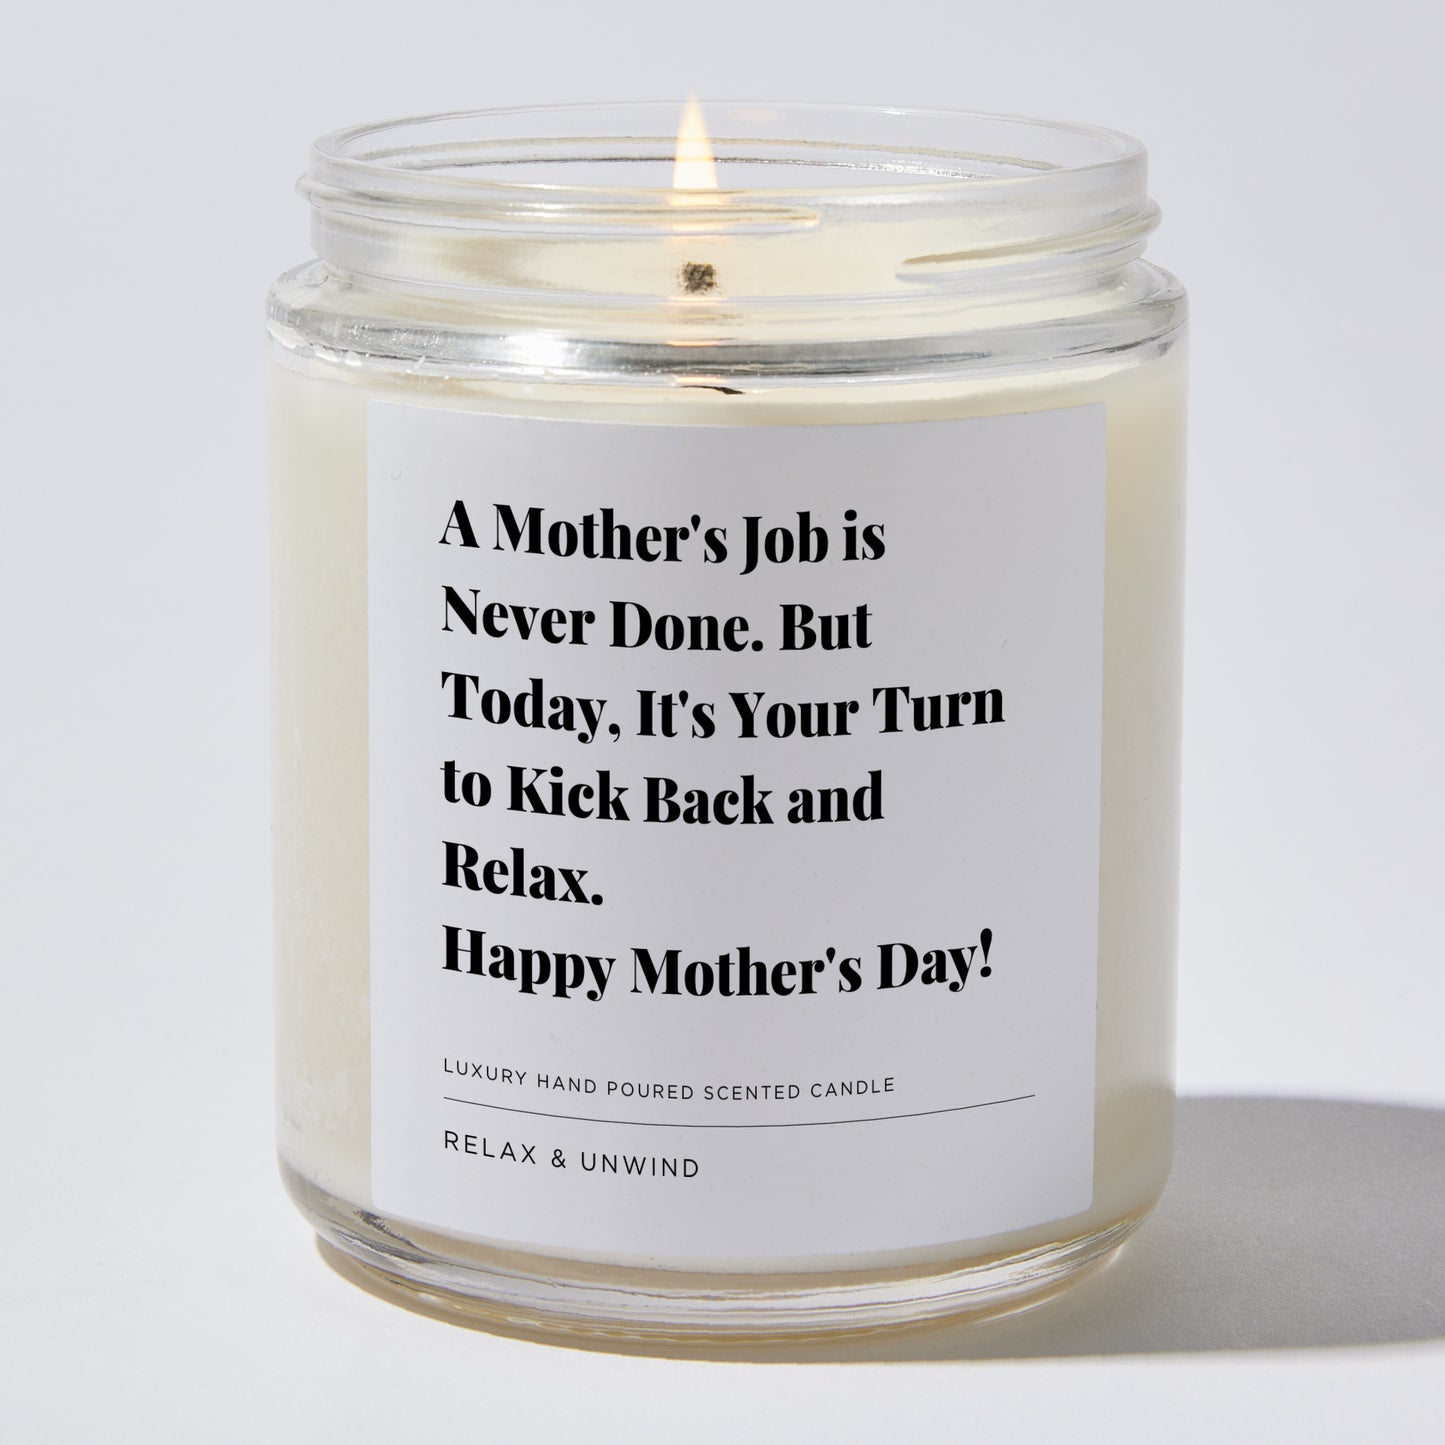 Gift for Mom - A mother's job is never done. But today, it's your turn to kick back and relax. Happy Mother's Day! - Candle